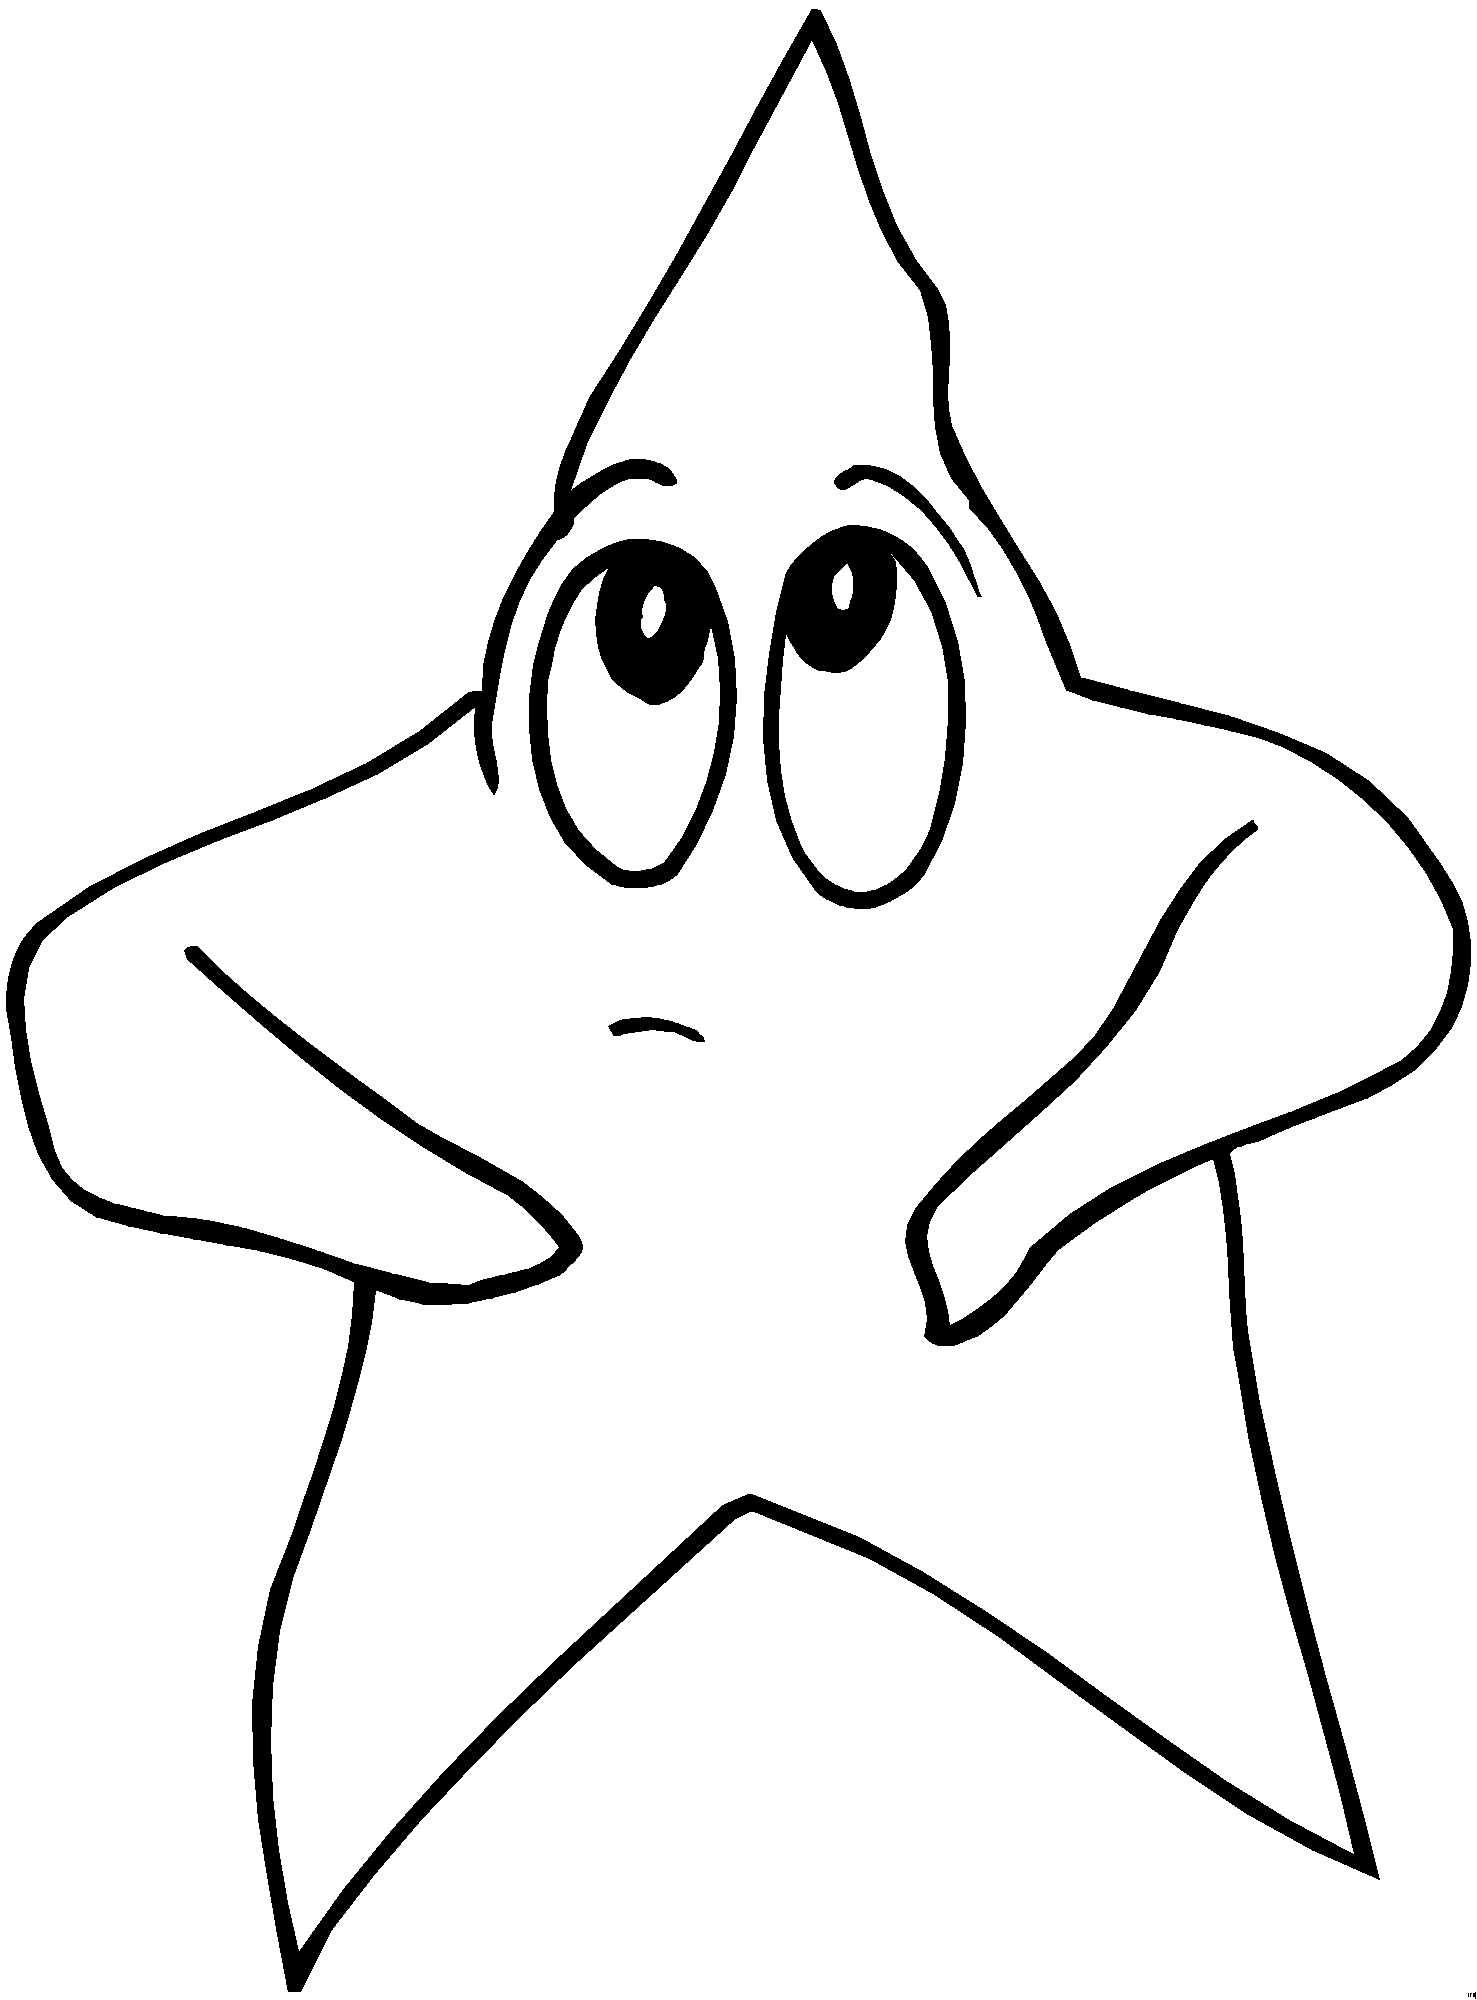 Star Coloring Pages - Coloringpages1001.com